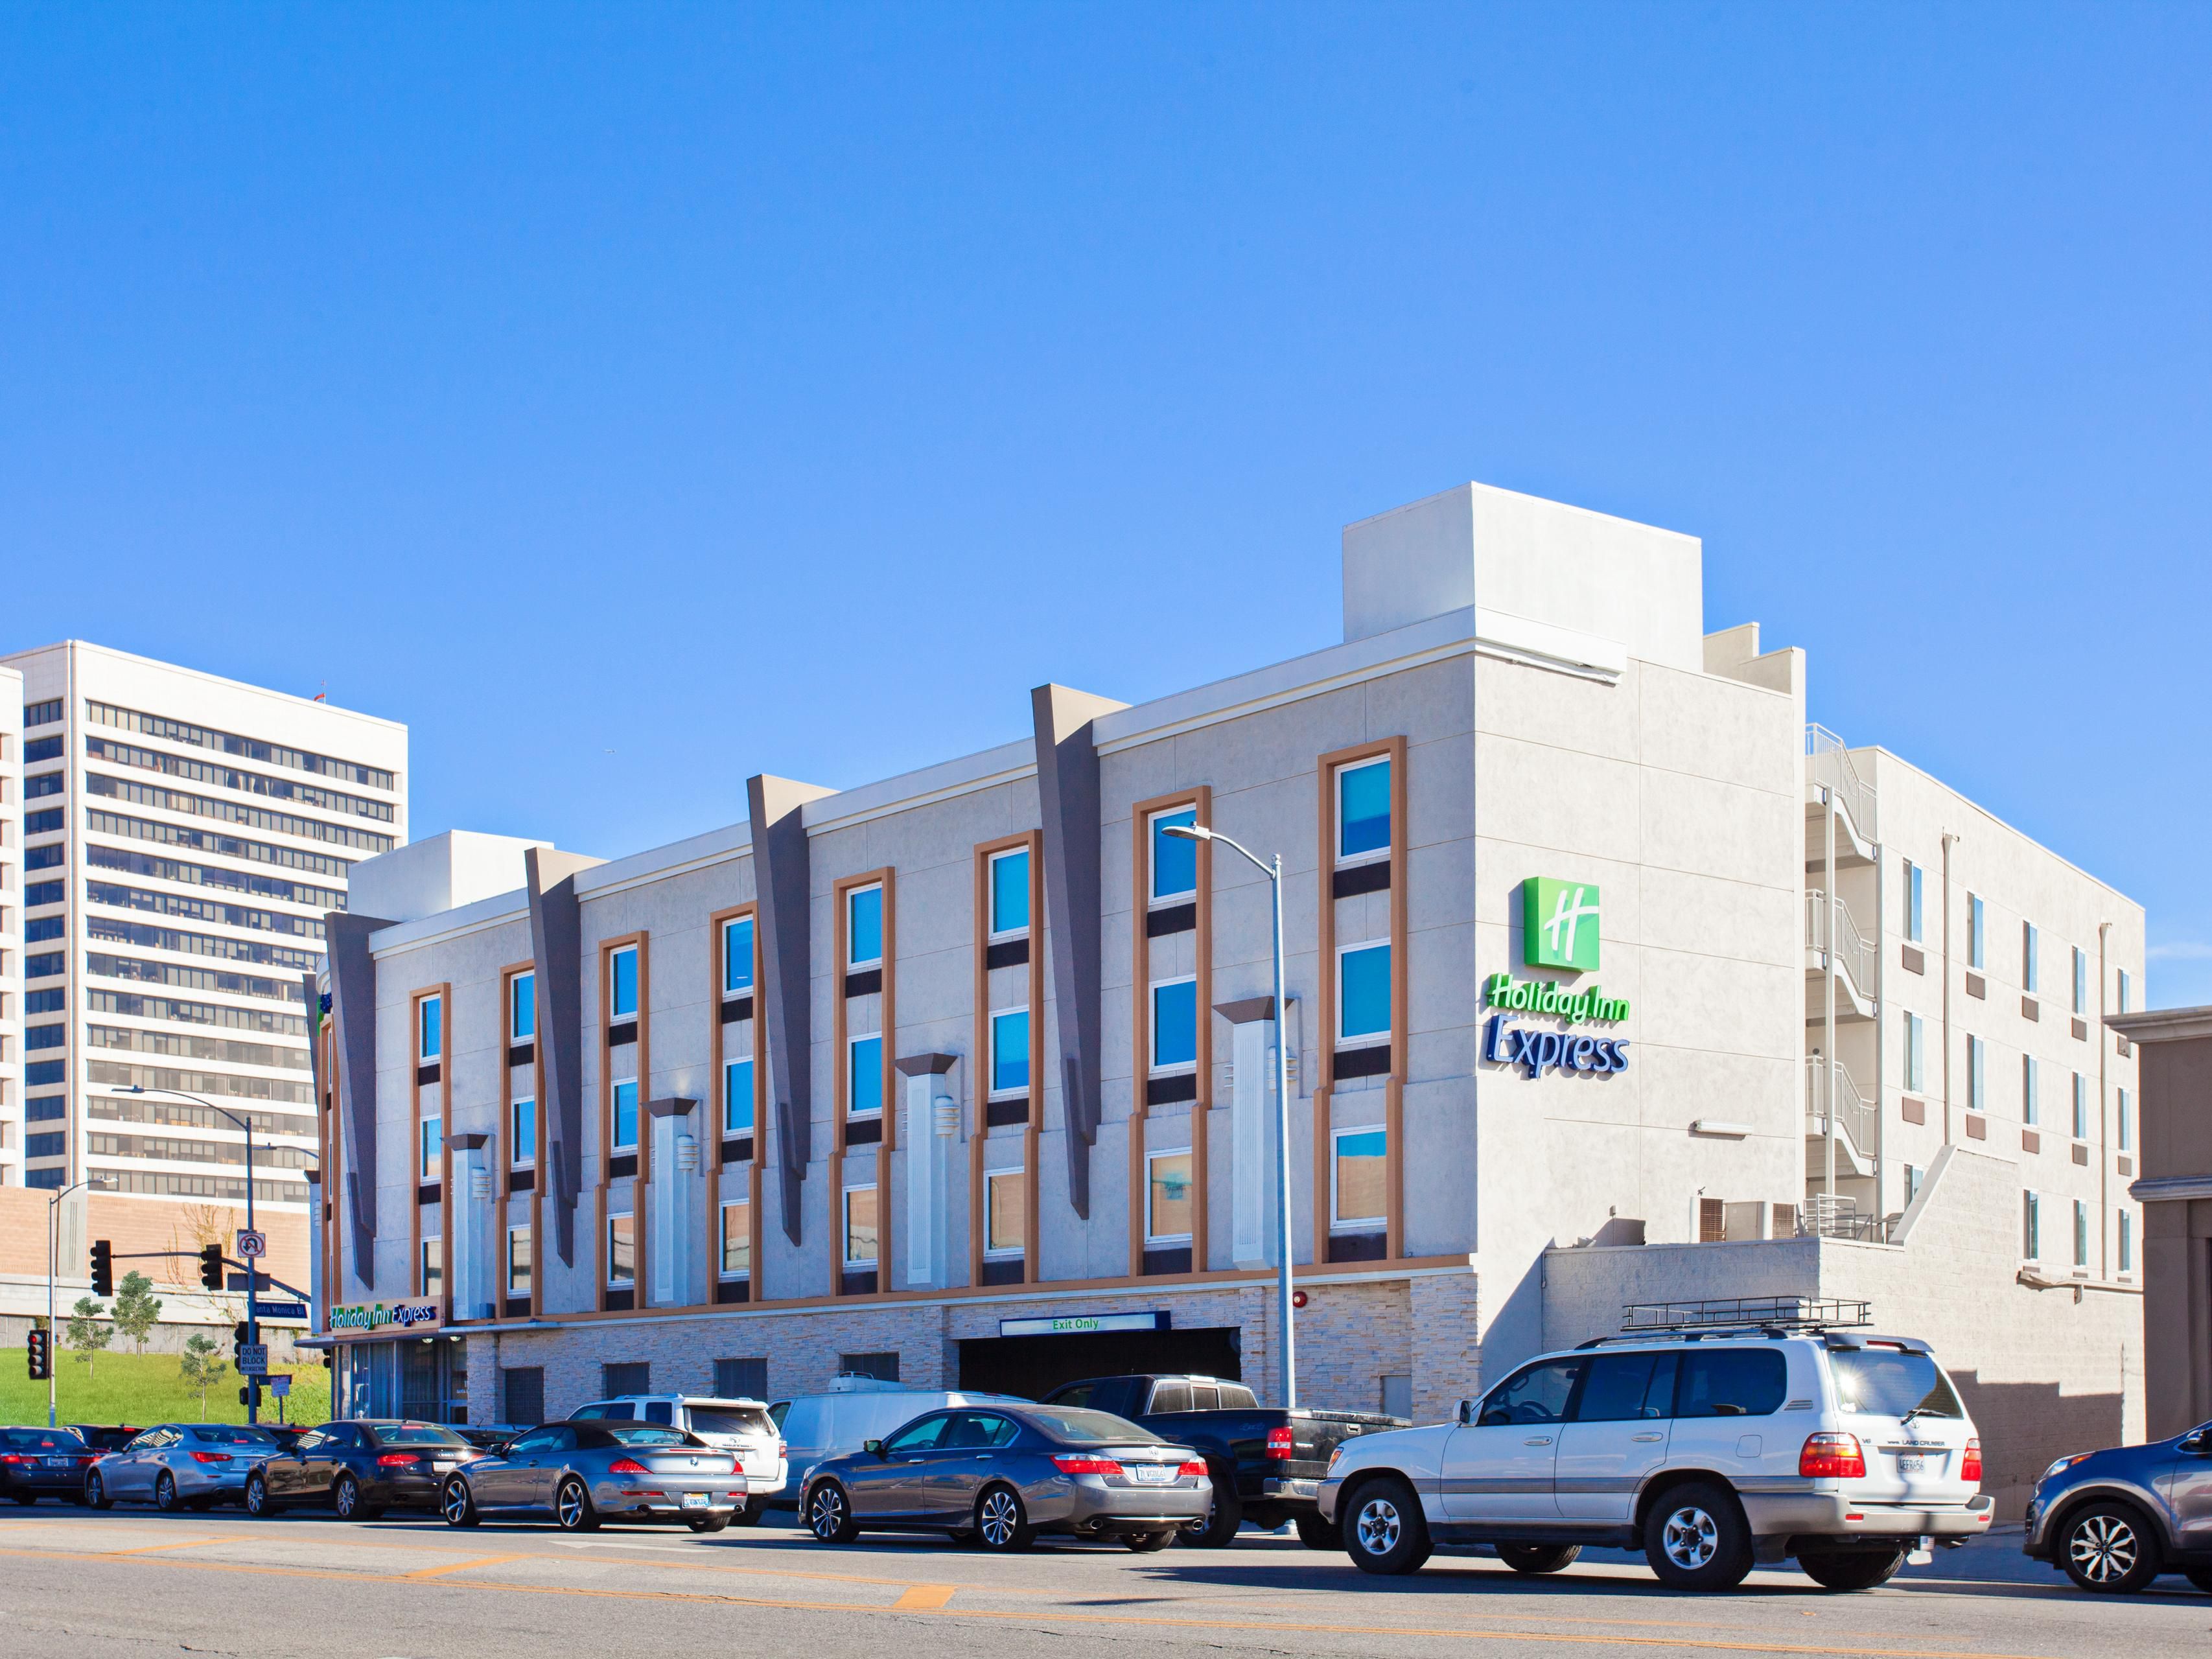 Holiday Inn Express West Los Angeles 5342133278 4x3